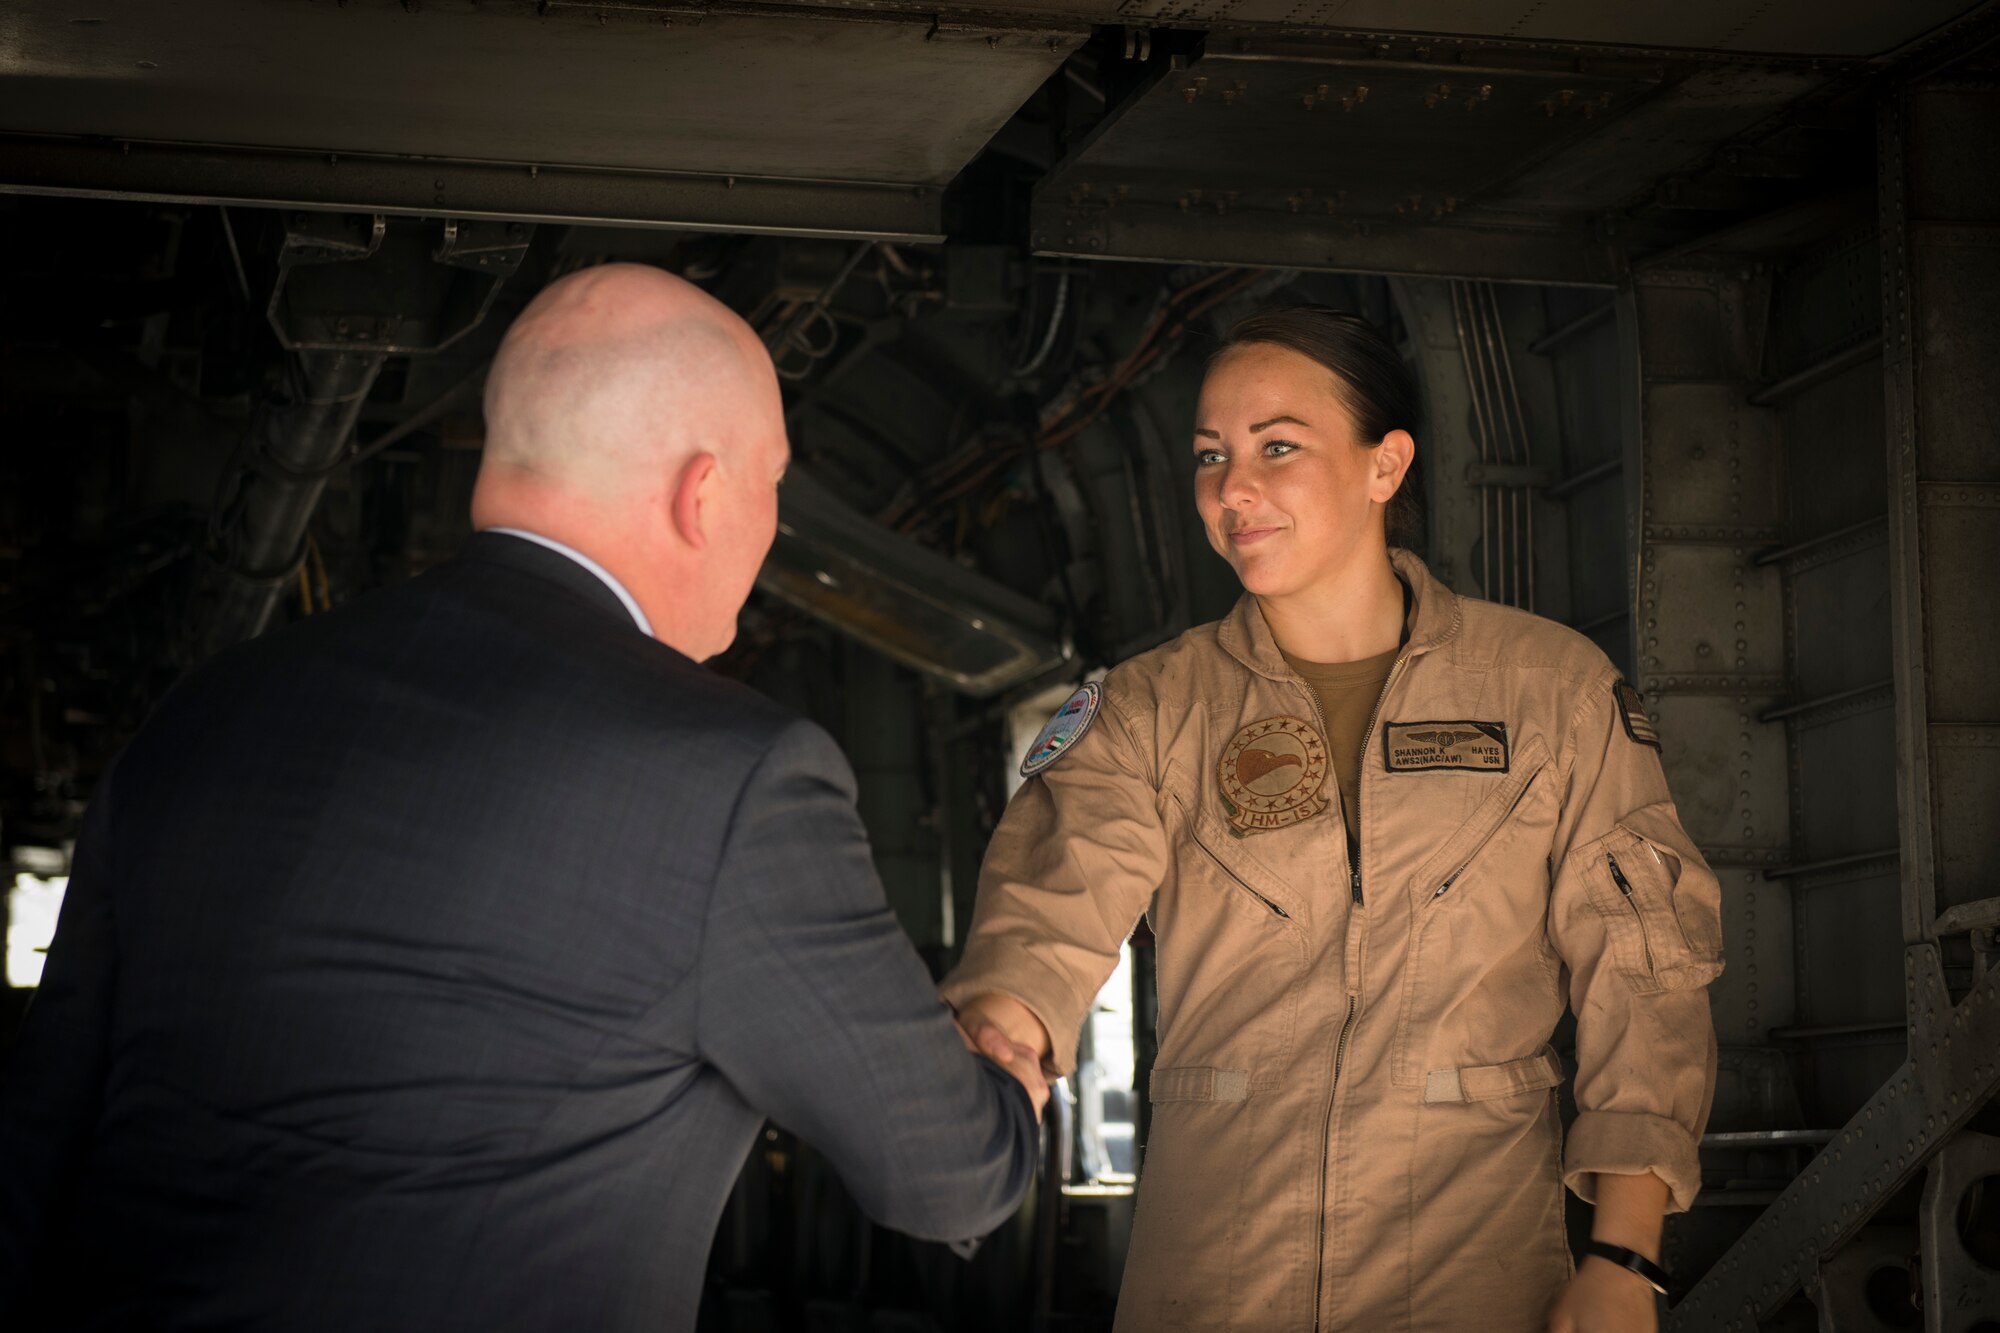 R. Clarke Cooper, left, Assistant Secretary of State for Political-Military Affairs, converses with U.S. Navy AWS2 (NAC/AW) Shannon Hayes, an MH-53E Sea Dragon crew chief with the “Blackhawks” of Helicopter Mine Countermeasures Squadron (HM) 15, inside a Sea Dragon at the Dubai Airshow, United Arab Emirates, Nov. 17, 2019.